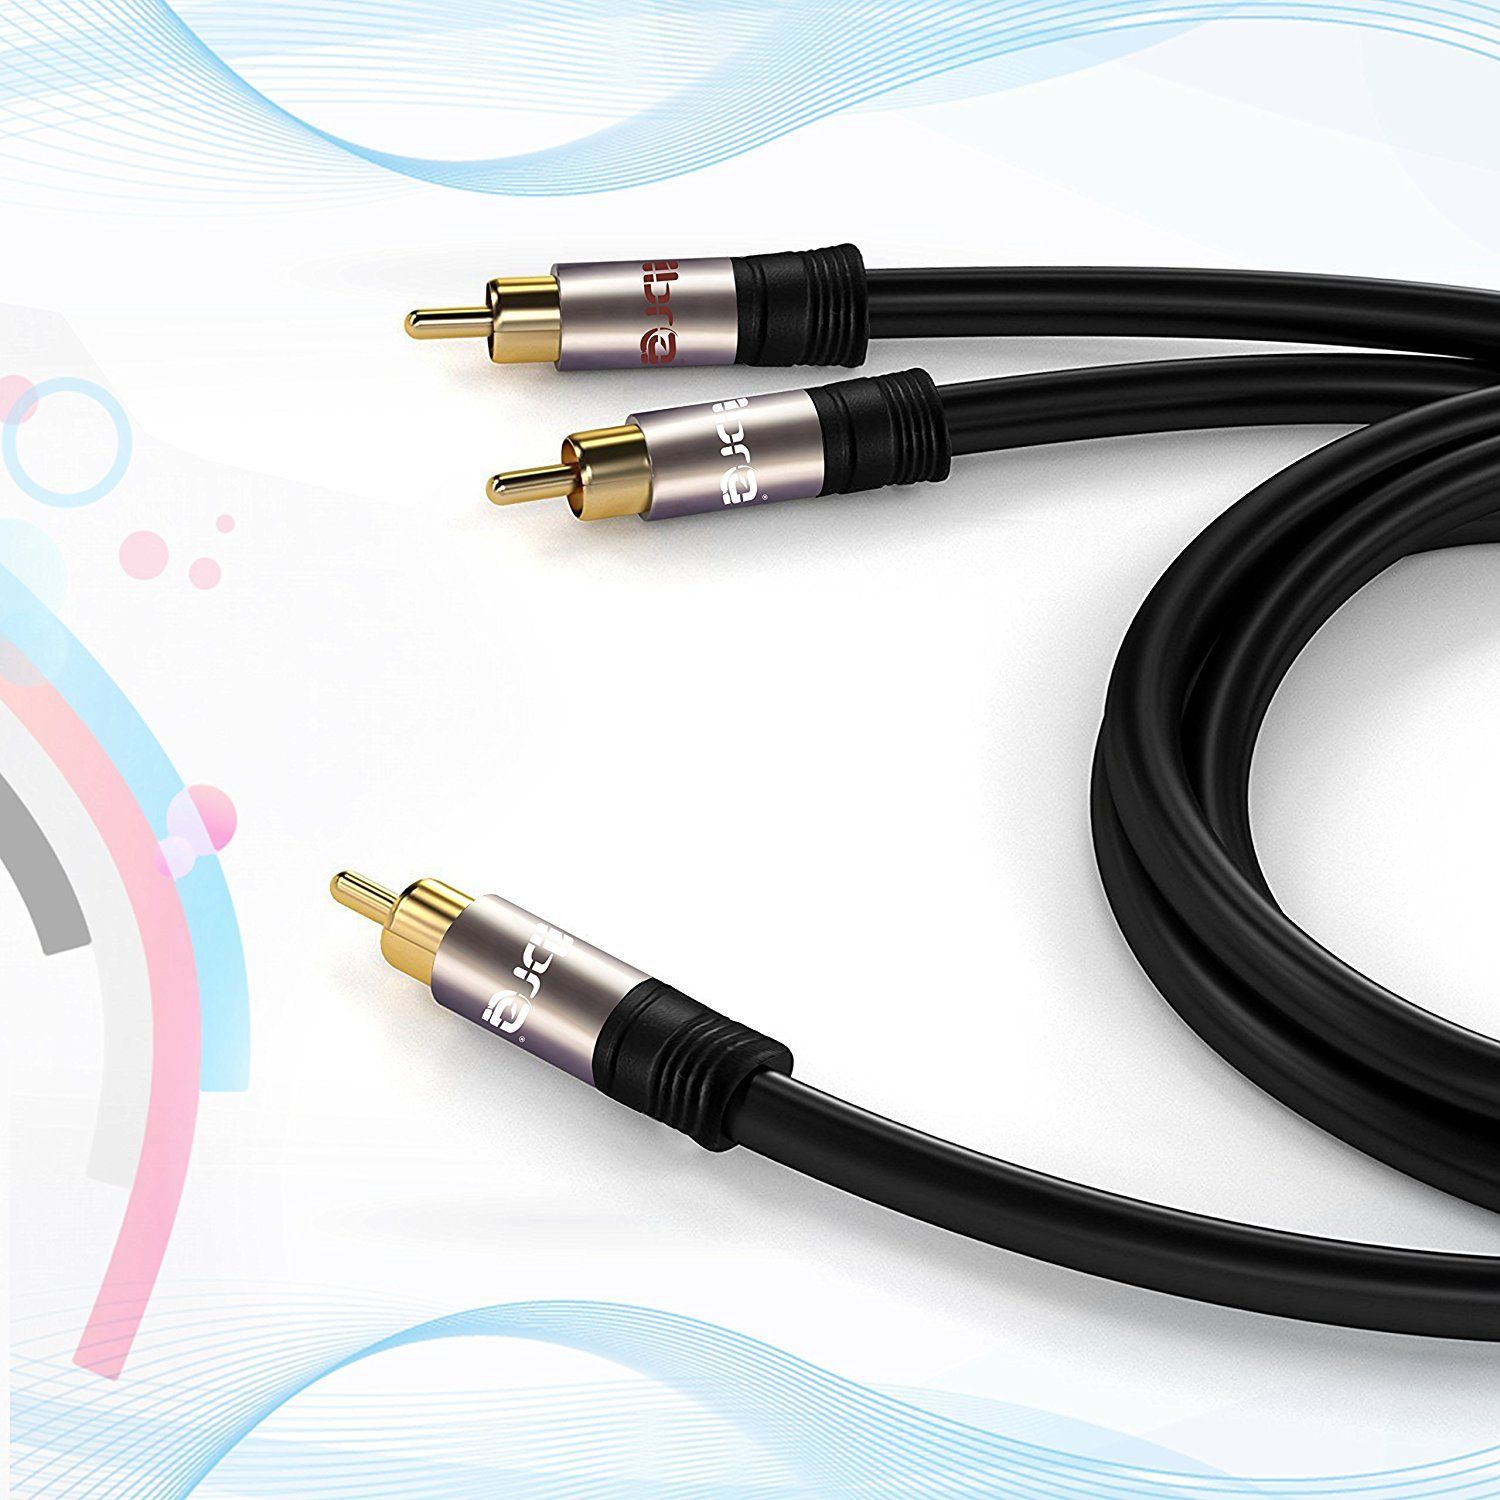 IBRA 20M Y Cable / Subwoofer Cable / Audio Cable / RCA Cable (1 x RCA to 2 x RCA) - GUN Metal Range